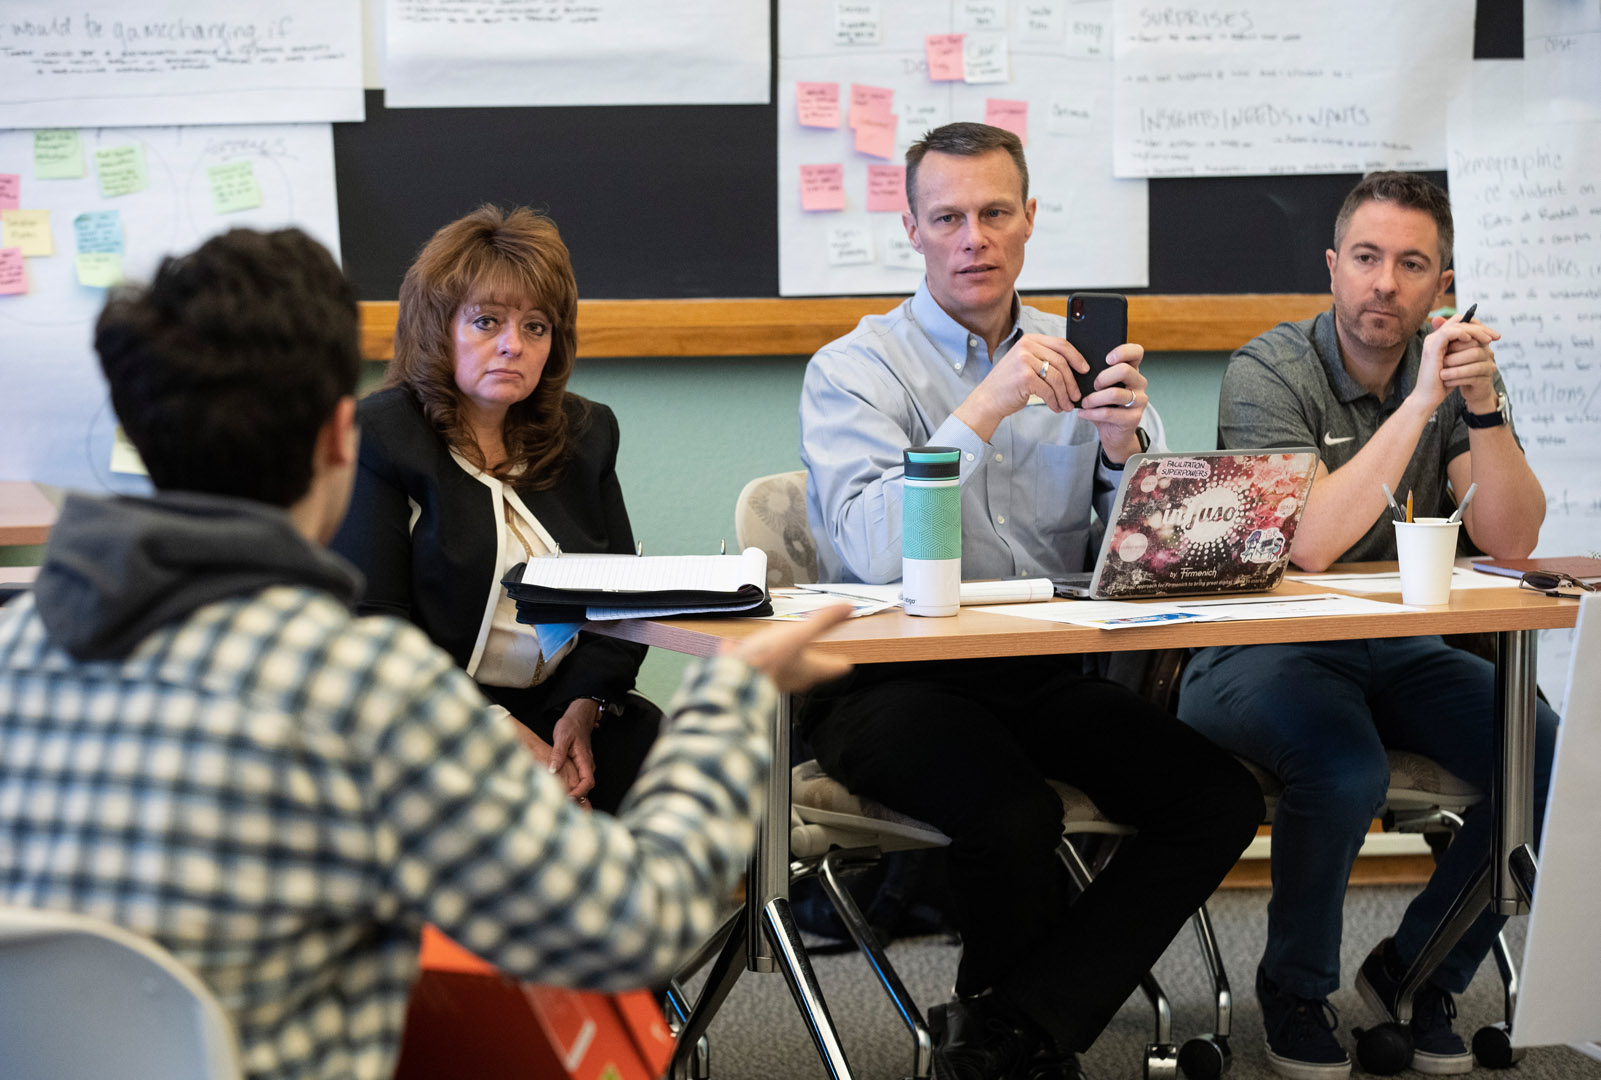 Staff members Brenda Soto, Randy Kruse, and Zak Kroger listen to student presentations that addressed food waste on campus during the Art of Innovation Half-Block course. Photo by Jennifer Coombes